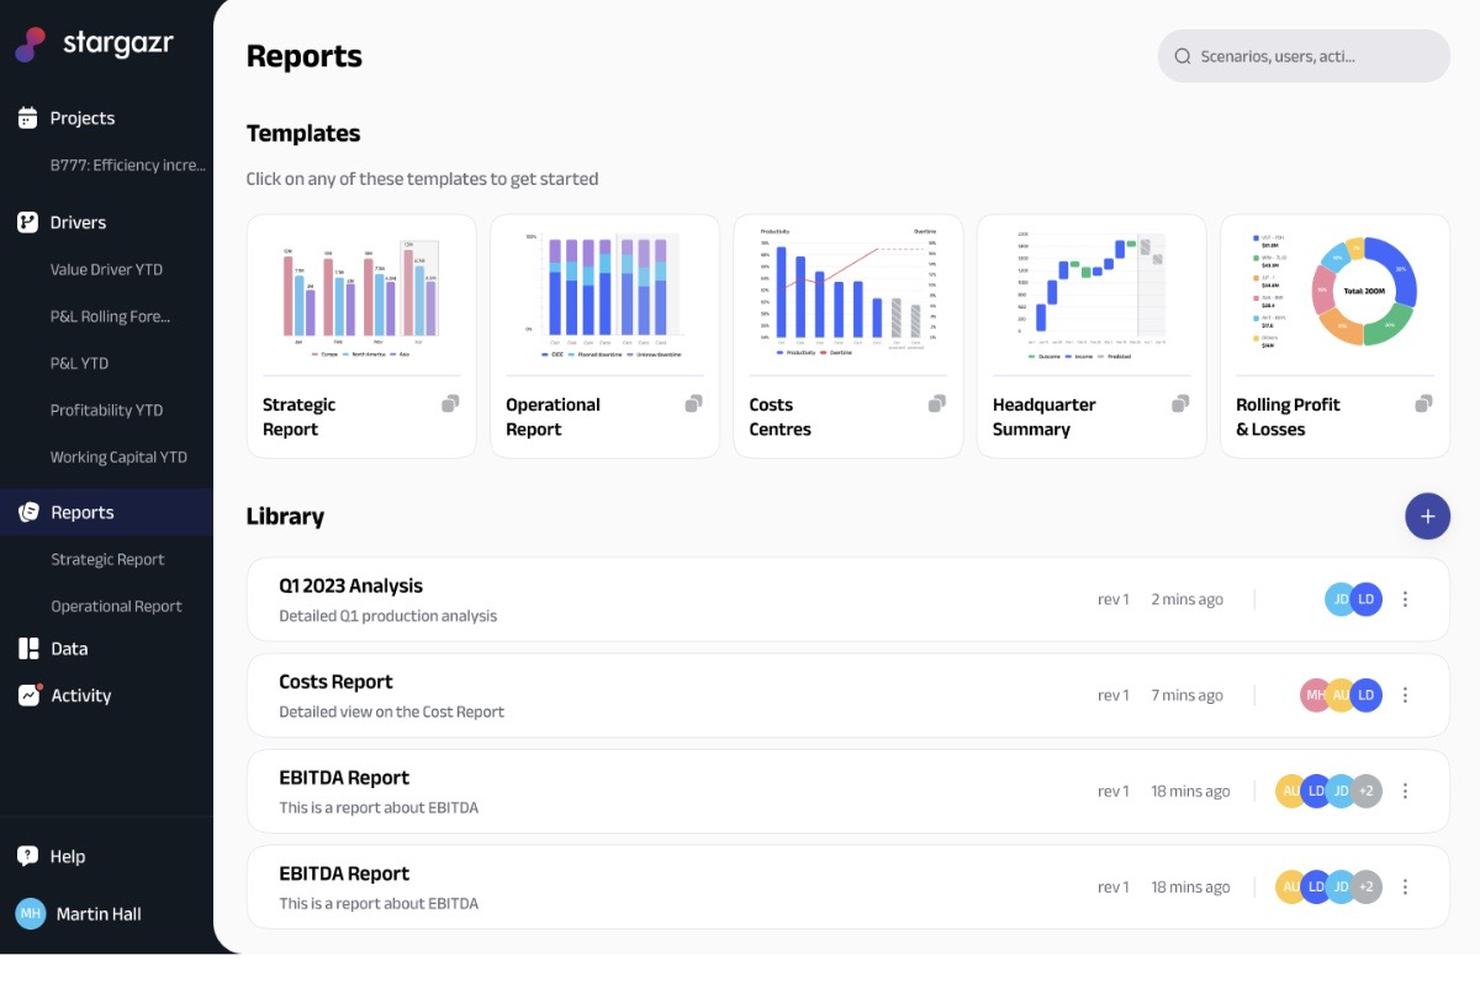 Real-time updates & Automated Reporting